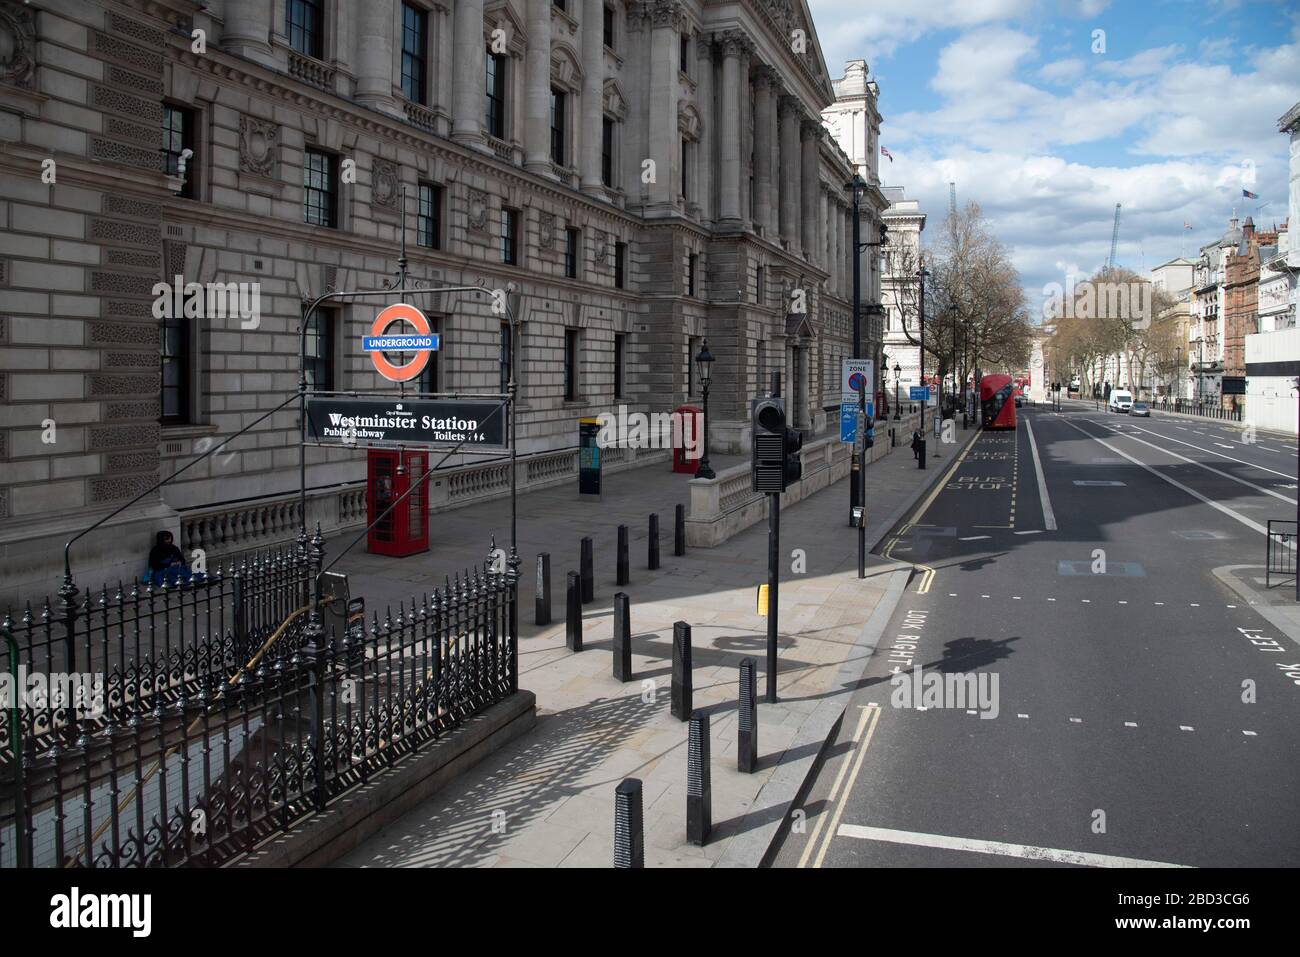 General view of a visibly quiet Whitehall in London, UK on April 6, 2020. Last night Prime Minister Boris Johnson was admitted to St Thomas' Hospital for undergoing tests after suffering 'persistent' symptoms of coronavirus for 10 days, this evening Prime Minister Johnson condition worsened and he was taken to intensive care. There have been almost 50,000 reported cases of the COVID-19 coronavirus in the United Kingdom and almost 5,000 deaths. The country is in its third week of lockdown measures aimed at slowing the spread of the virus. (Photo by Claire Doherty/Sipa USA) Stock Photo